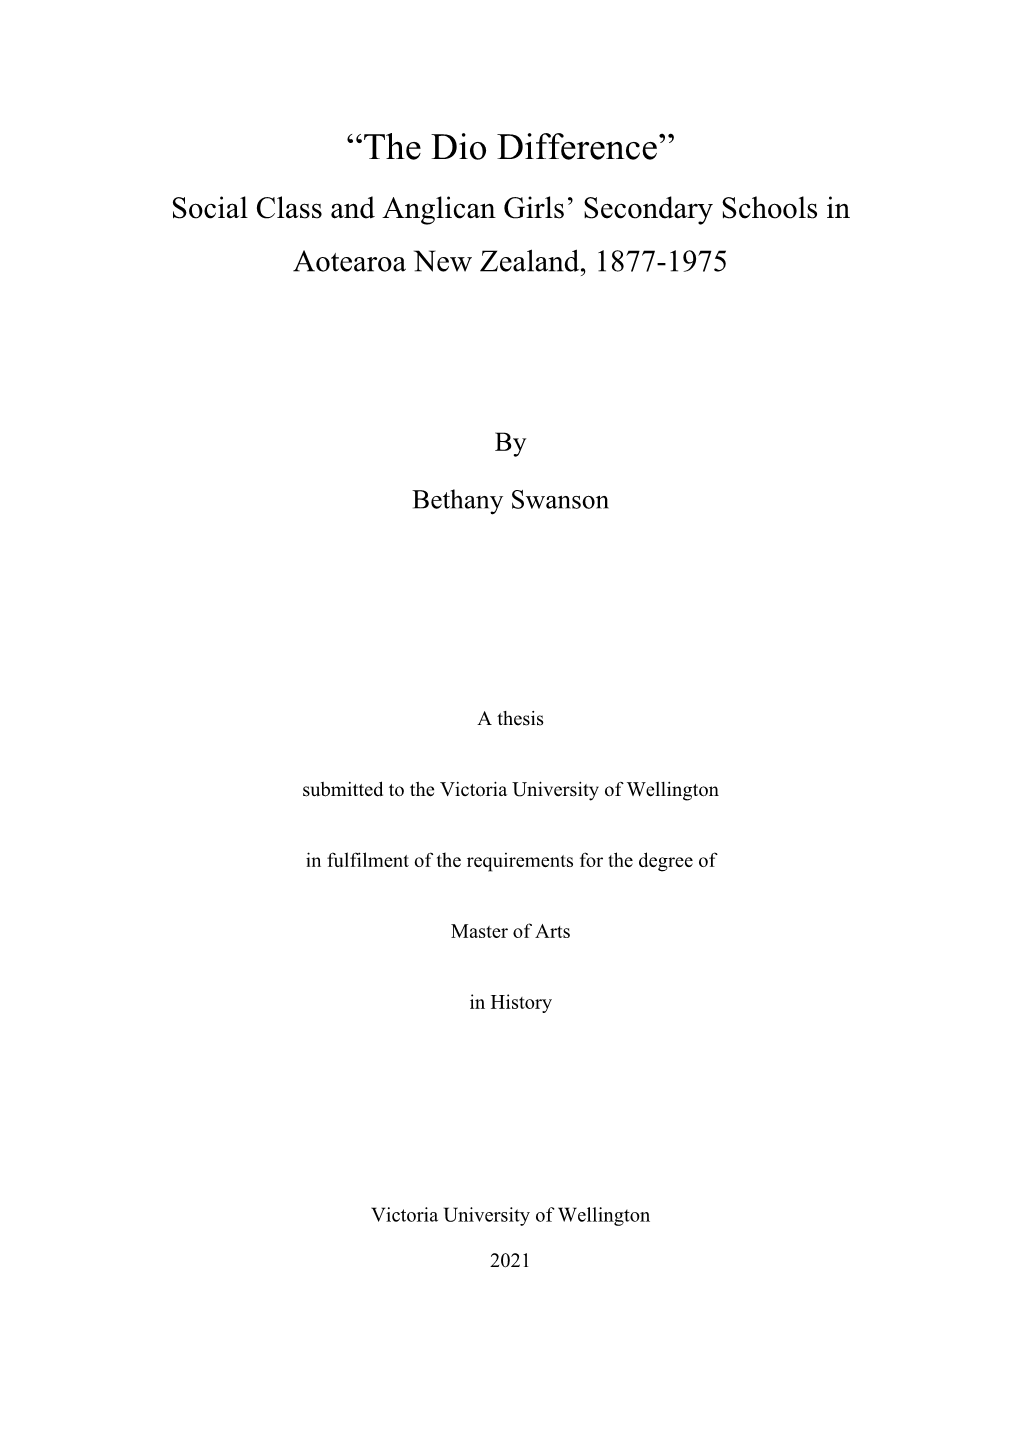 “The Dio Difference” Social Class and Anglican Girls’ Secondary Schools in Aotearoa New Zealand, 1877-1975